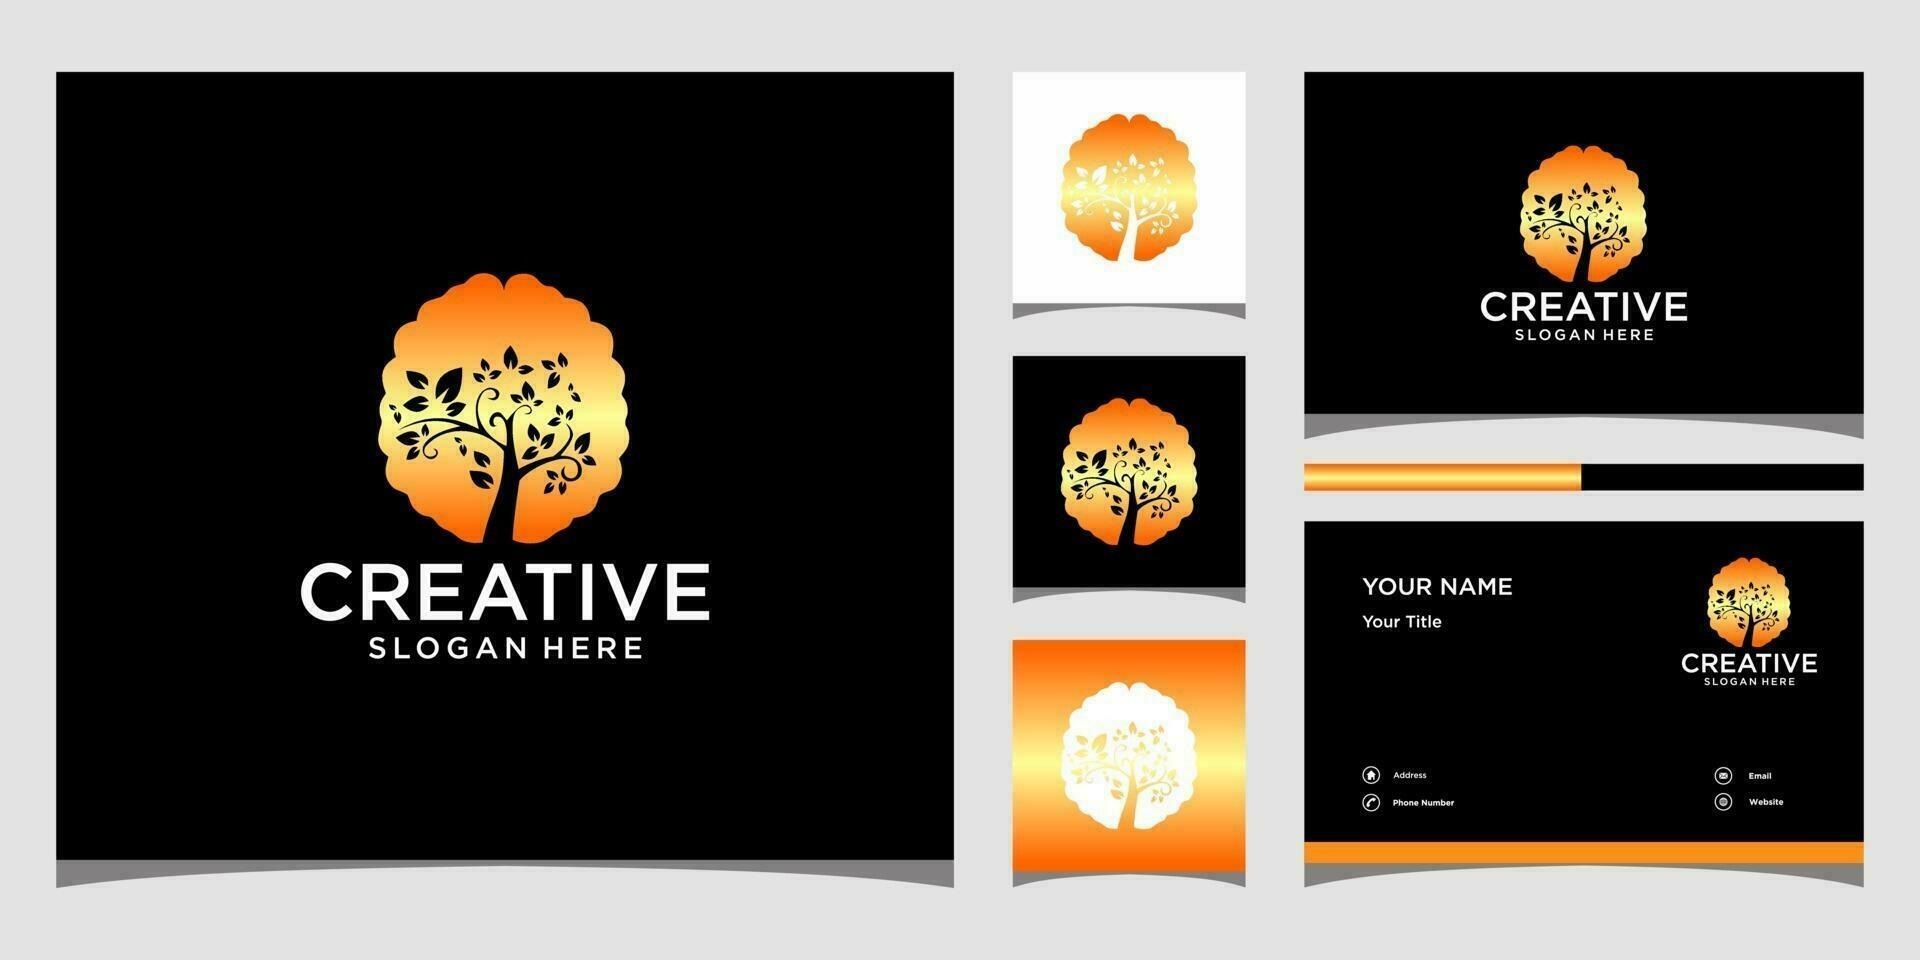 Brain and tree logo templates and business card design vector